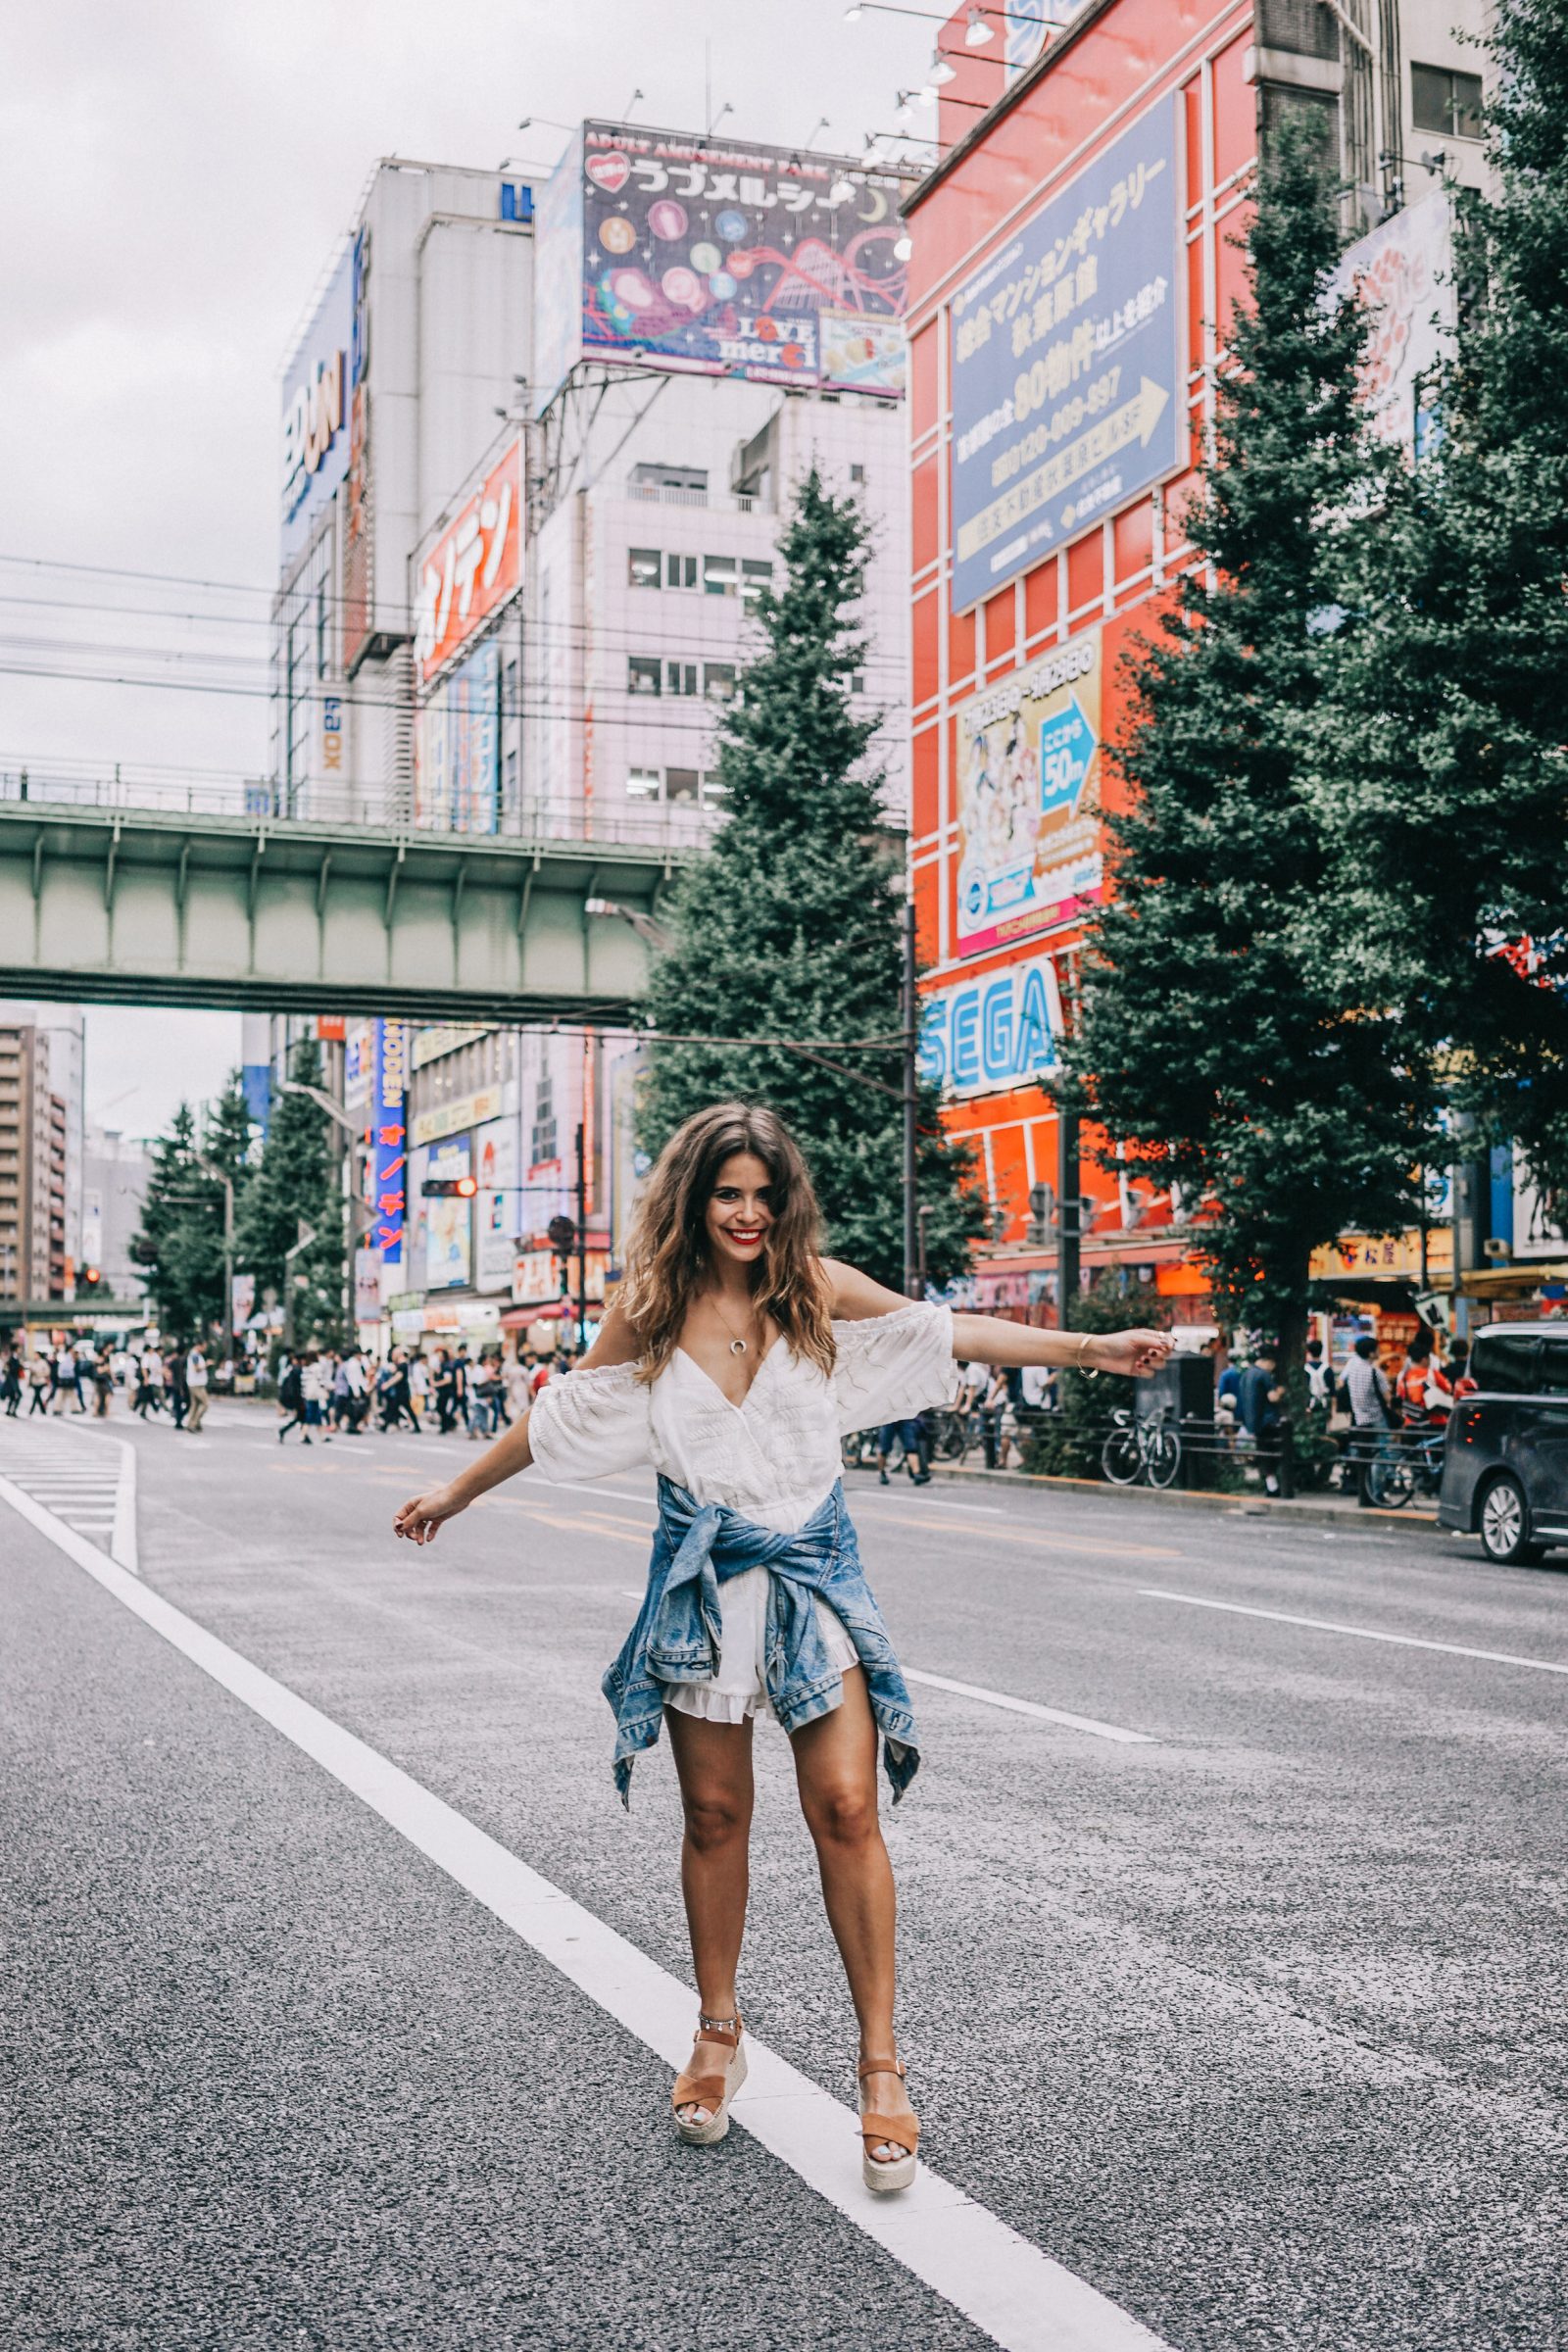 tokyo_travel_guide-outfit-collage_vintage-street_style-lovers_and_friends_jumpsuit-white_outfit-espadrilles-backpack-levis_denim_jacket-akihabara-127